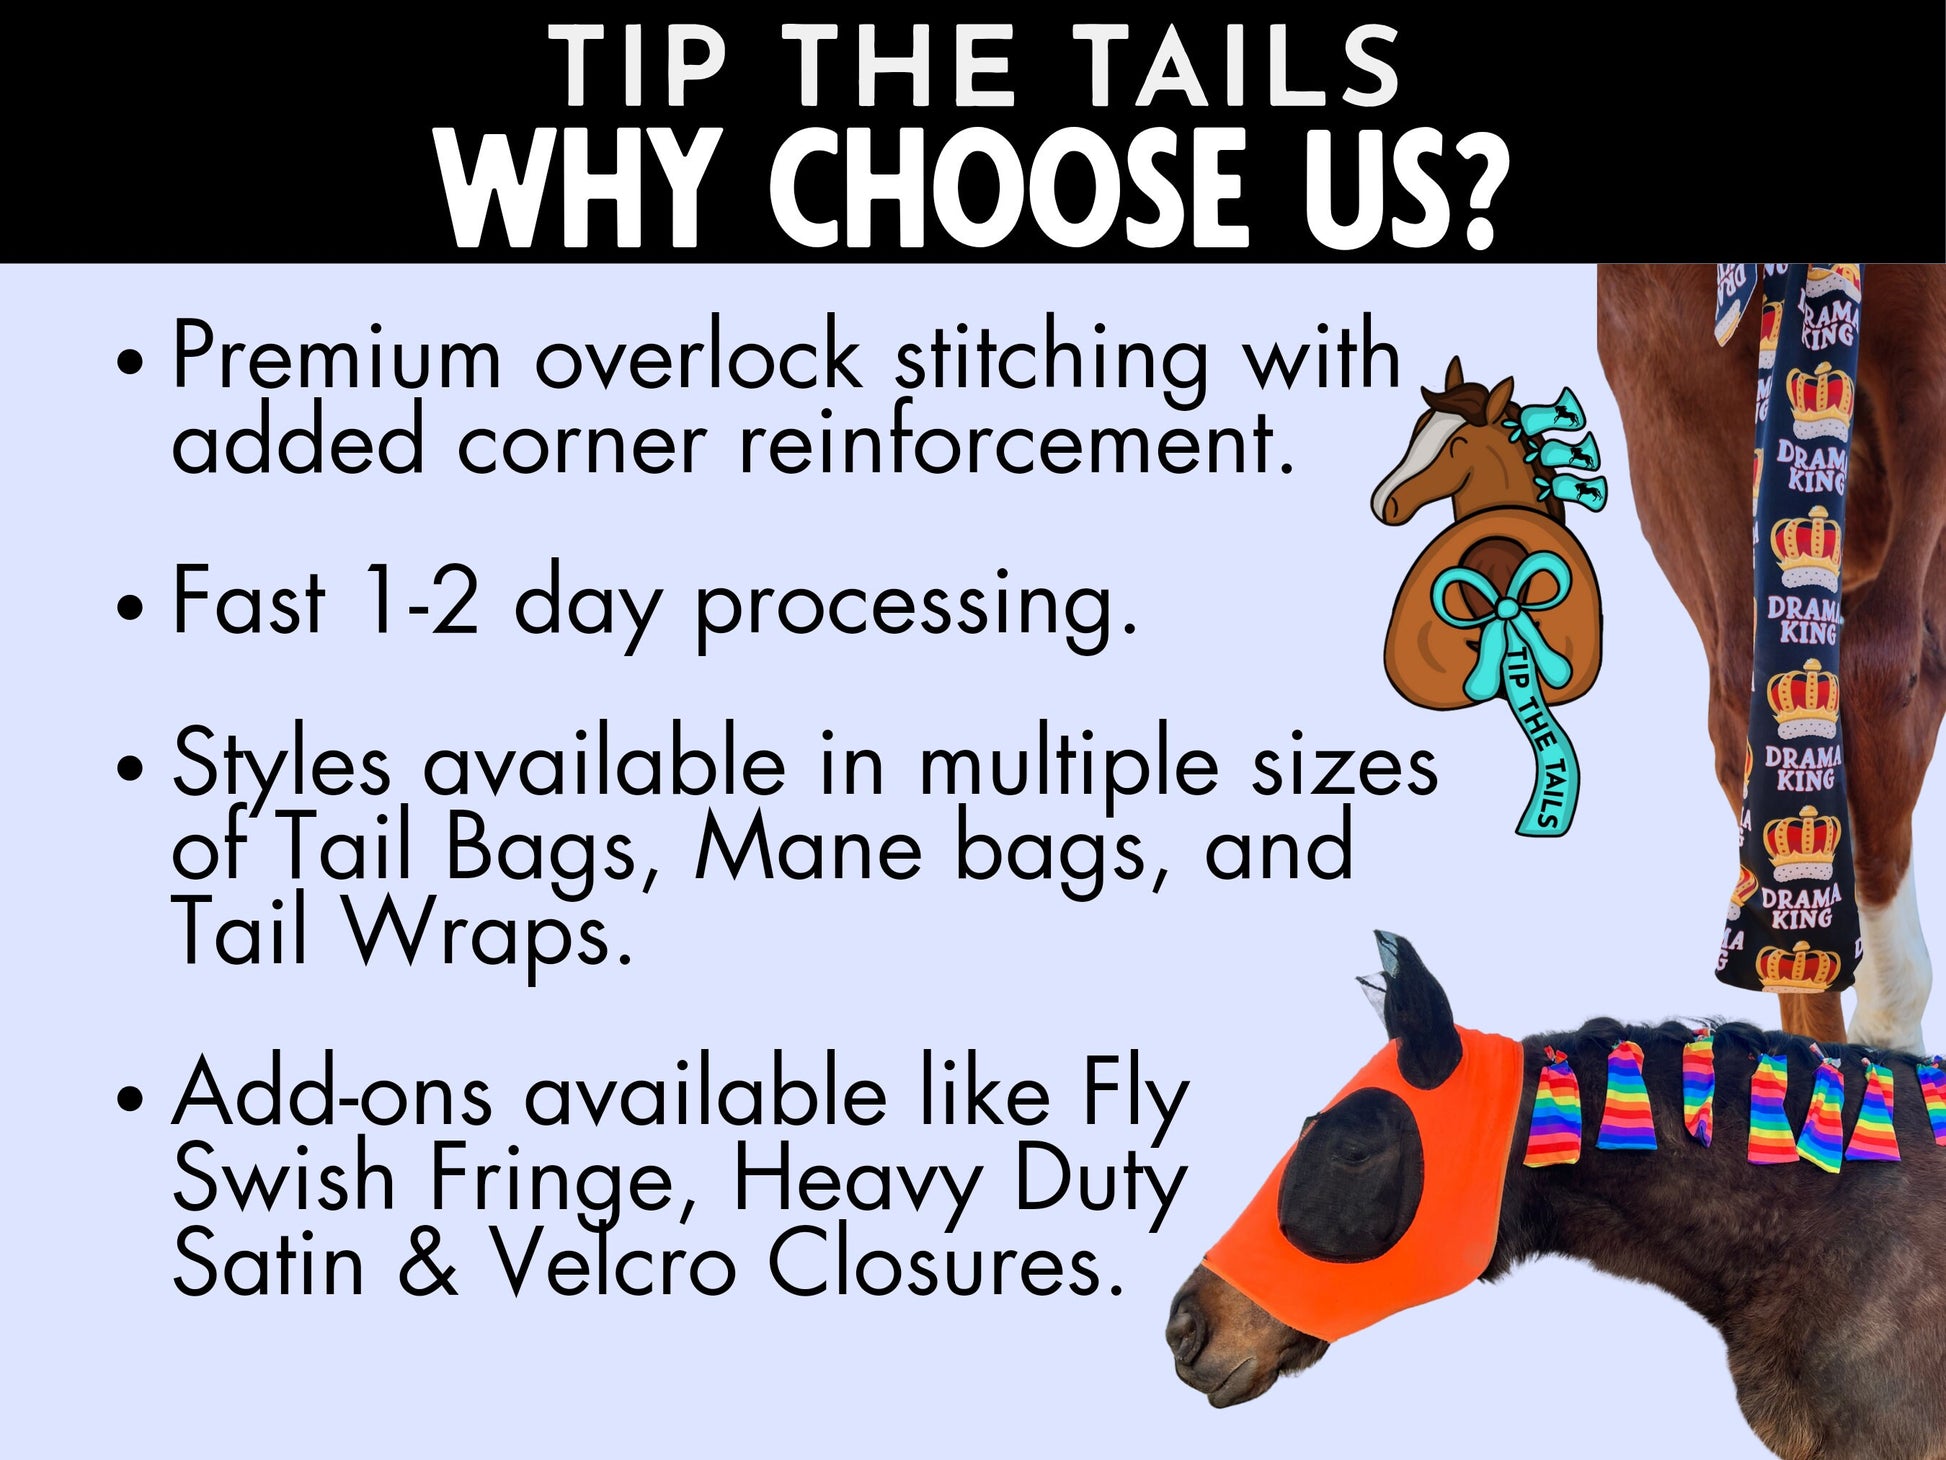 Butt Look Big? Equine Tail Bag-Tip The Tails